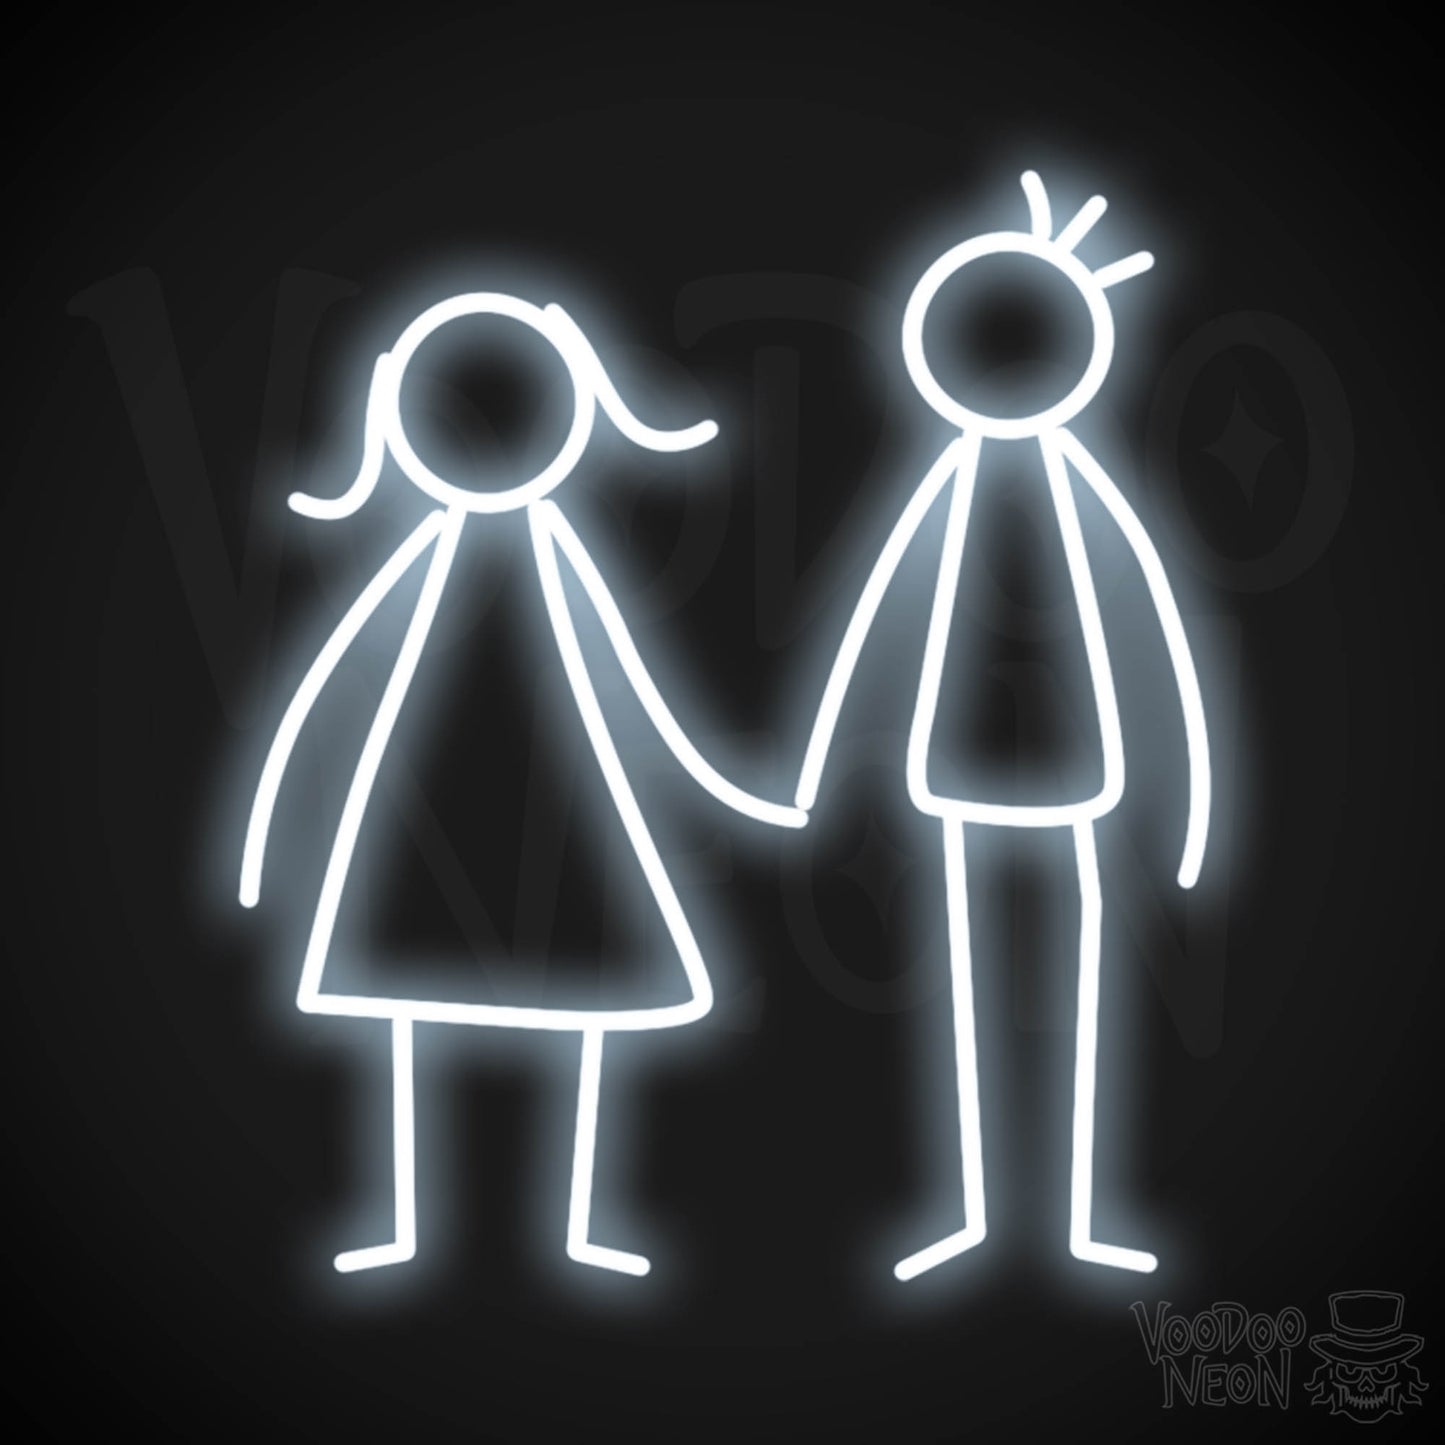 Stick Figures Holding Hands Neon Sign - Neon Stick Figures Wall Art - Color Cool White